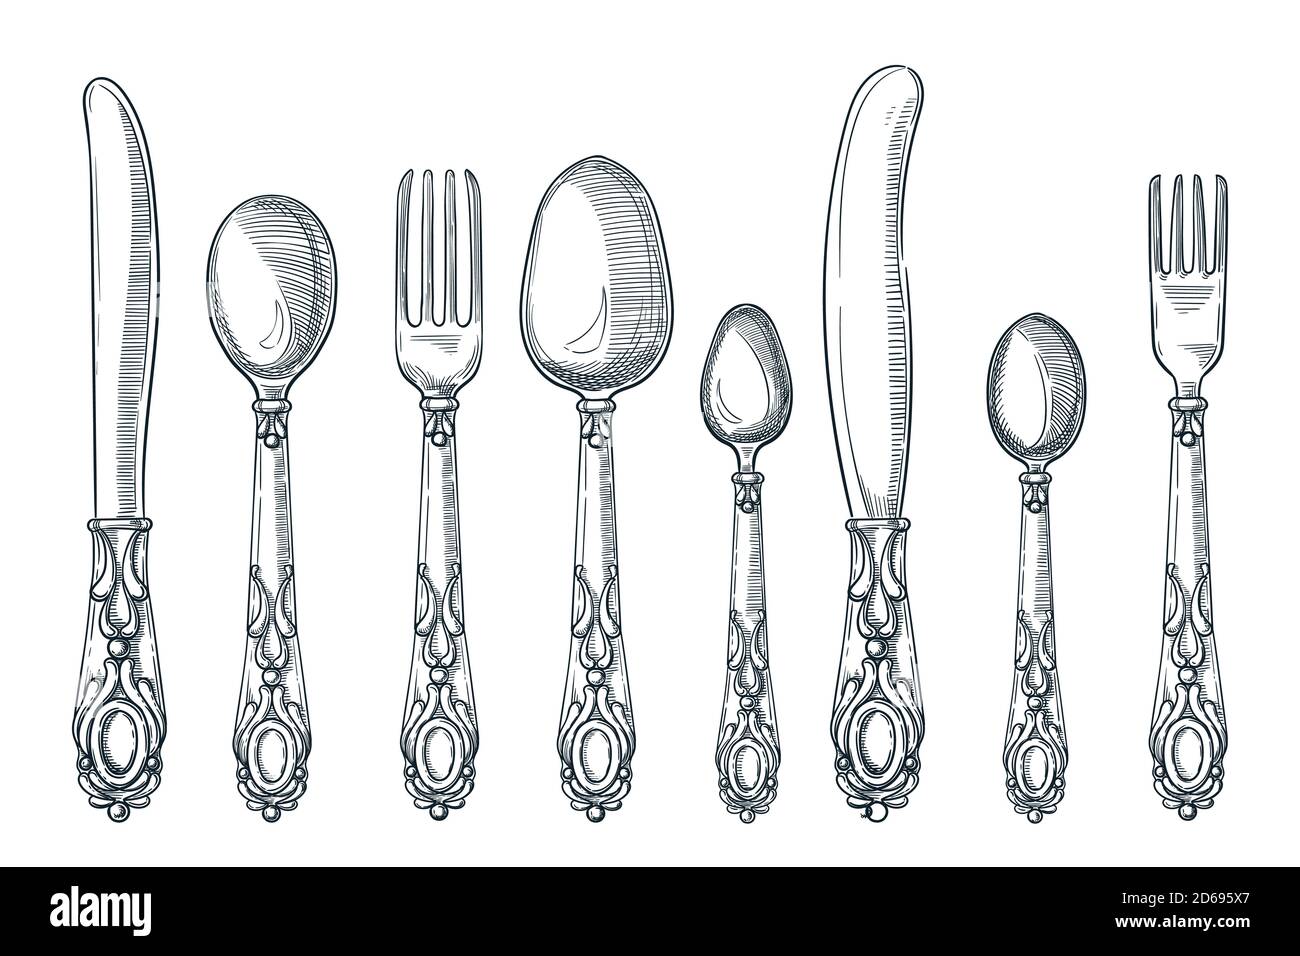 Table silver vintage cutlery. Vector hand drawn sketch illustration. Silverware spoon, knife and fork design elements, isolated on white background. K Stock Vector